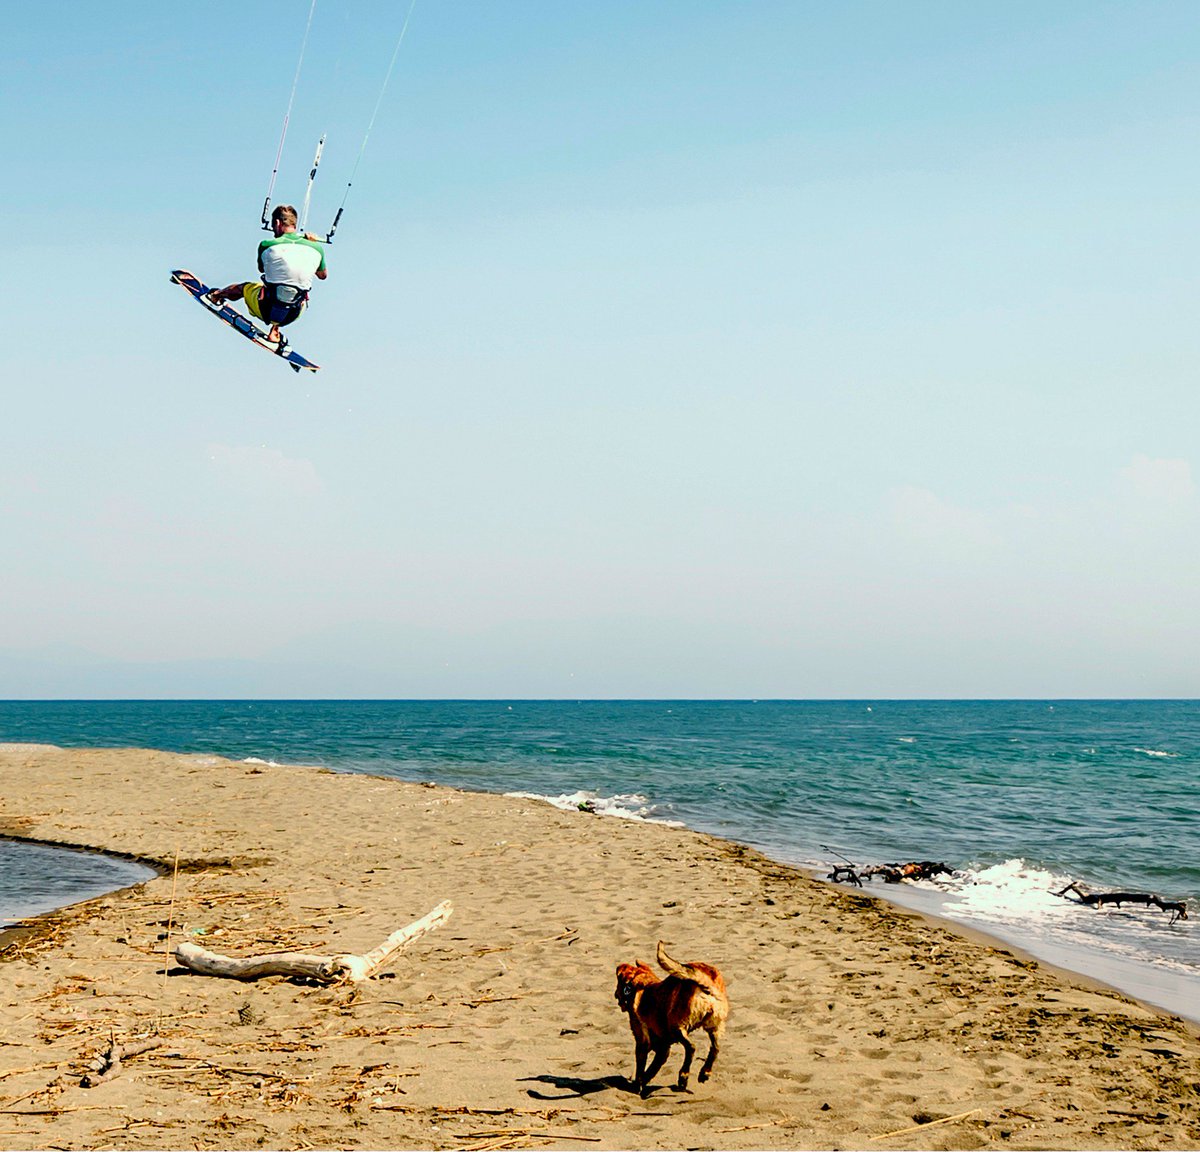 Sport, relax and dogs? Yes, its possible at #SoulBeachHouseFuerteventura 
More info 👉 ow.ly/D3Me30jwZdQ 
#SolBeachHouseFuerteventura #DogsFriendly #Fuerteventura #Travel